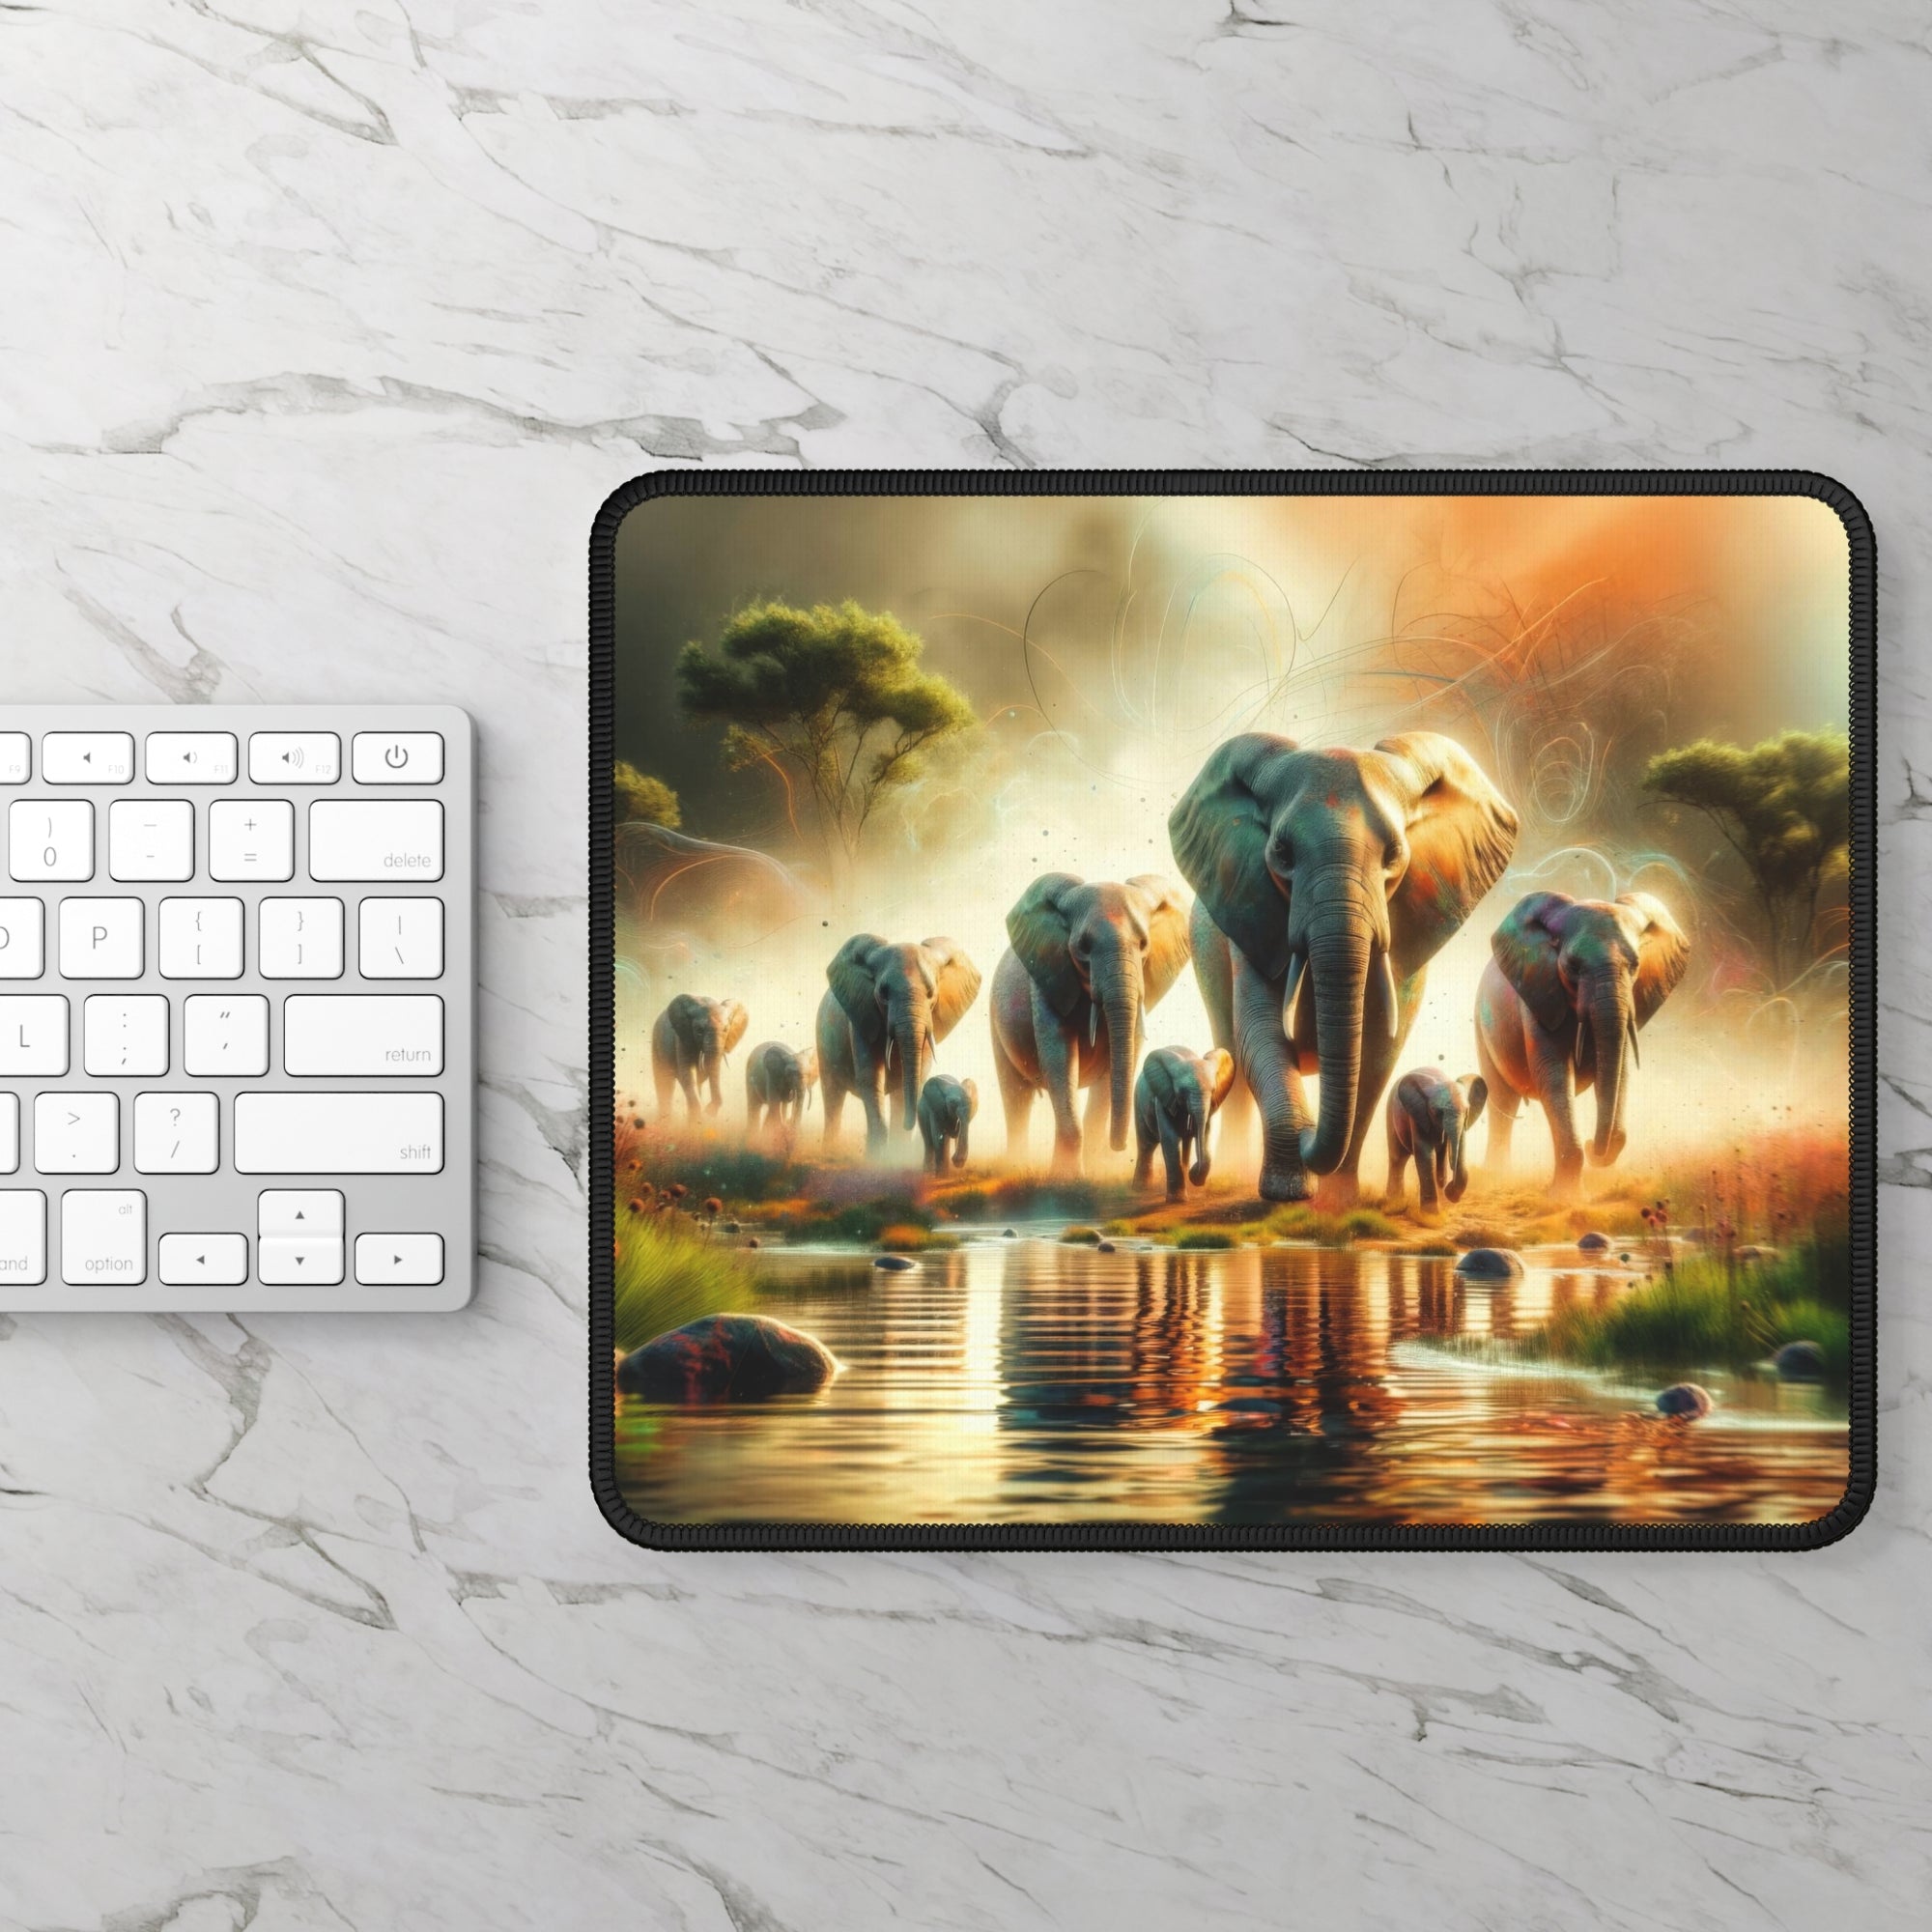 Elephants in Morning Mist Gaming Mouse Pad